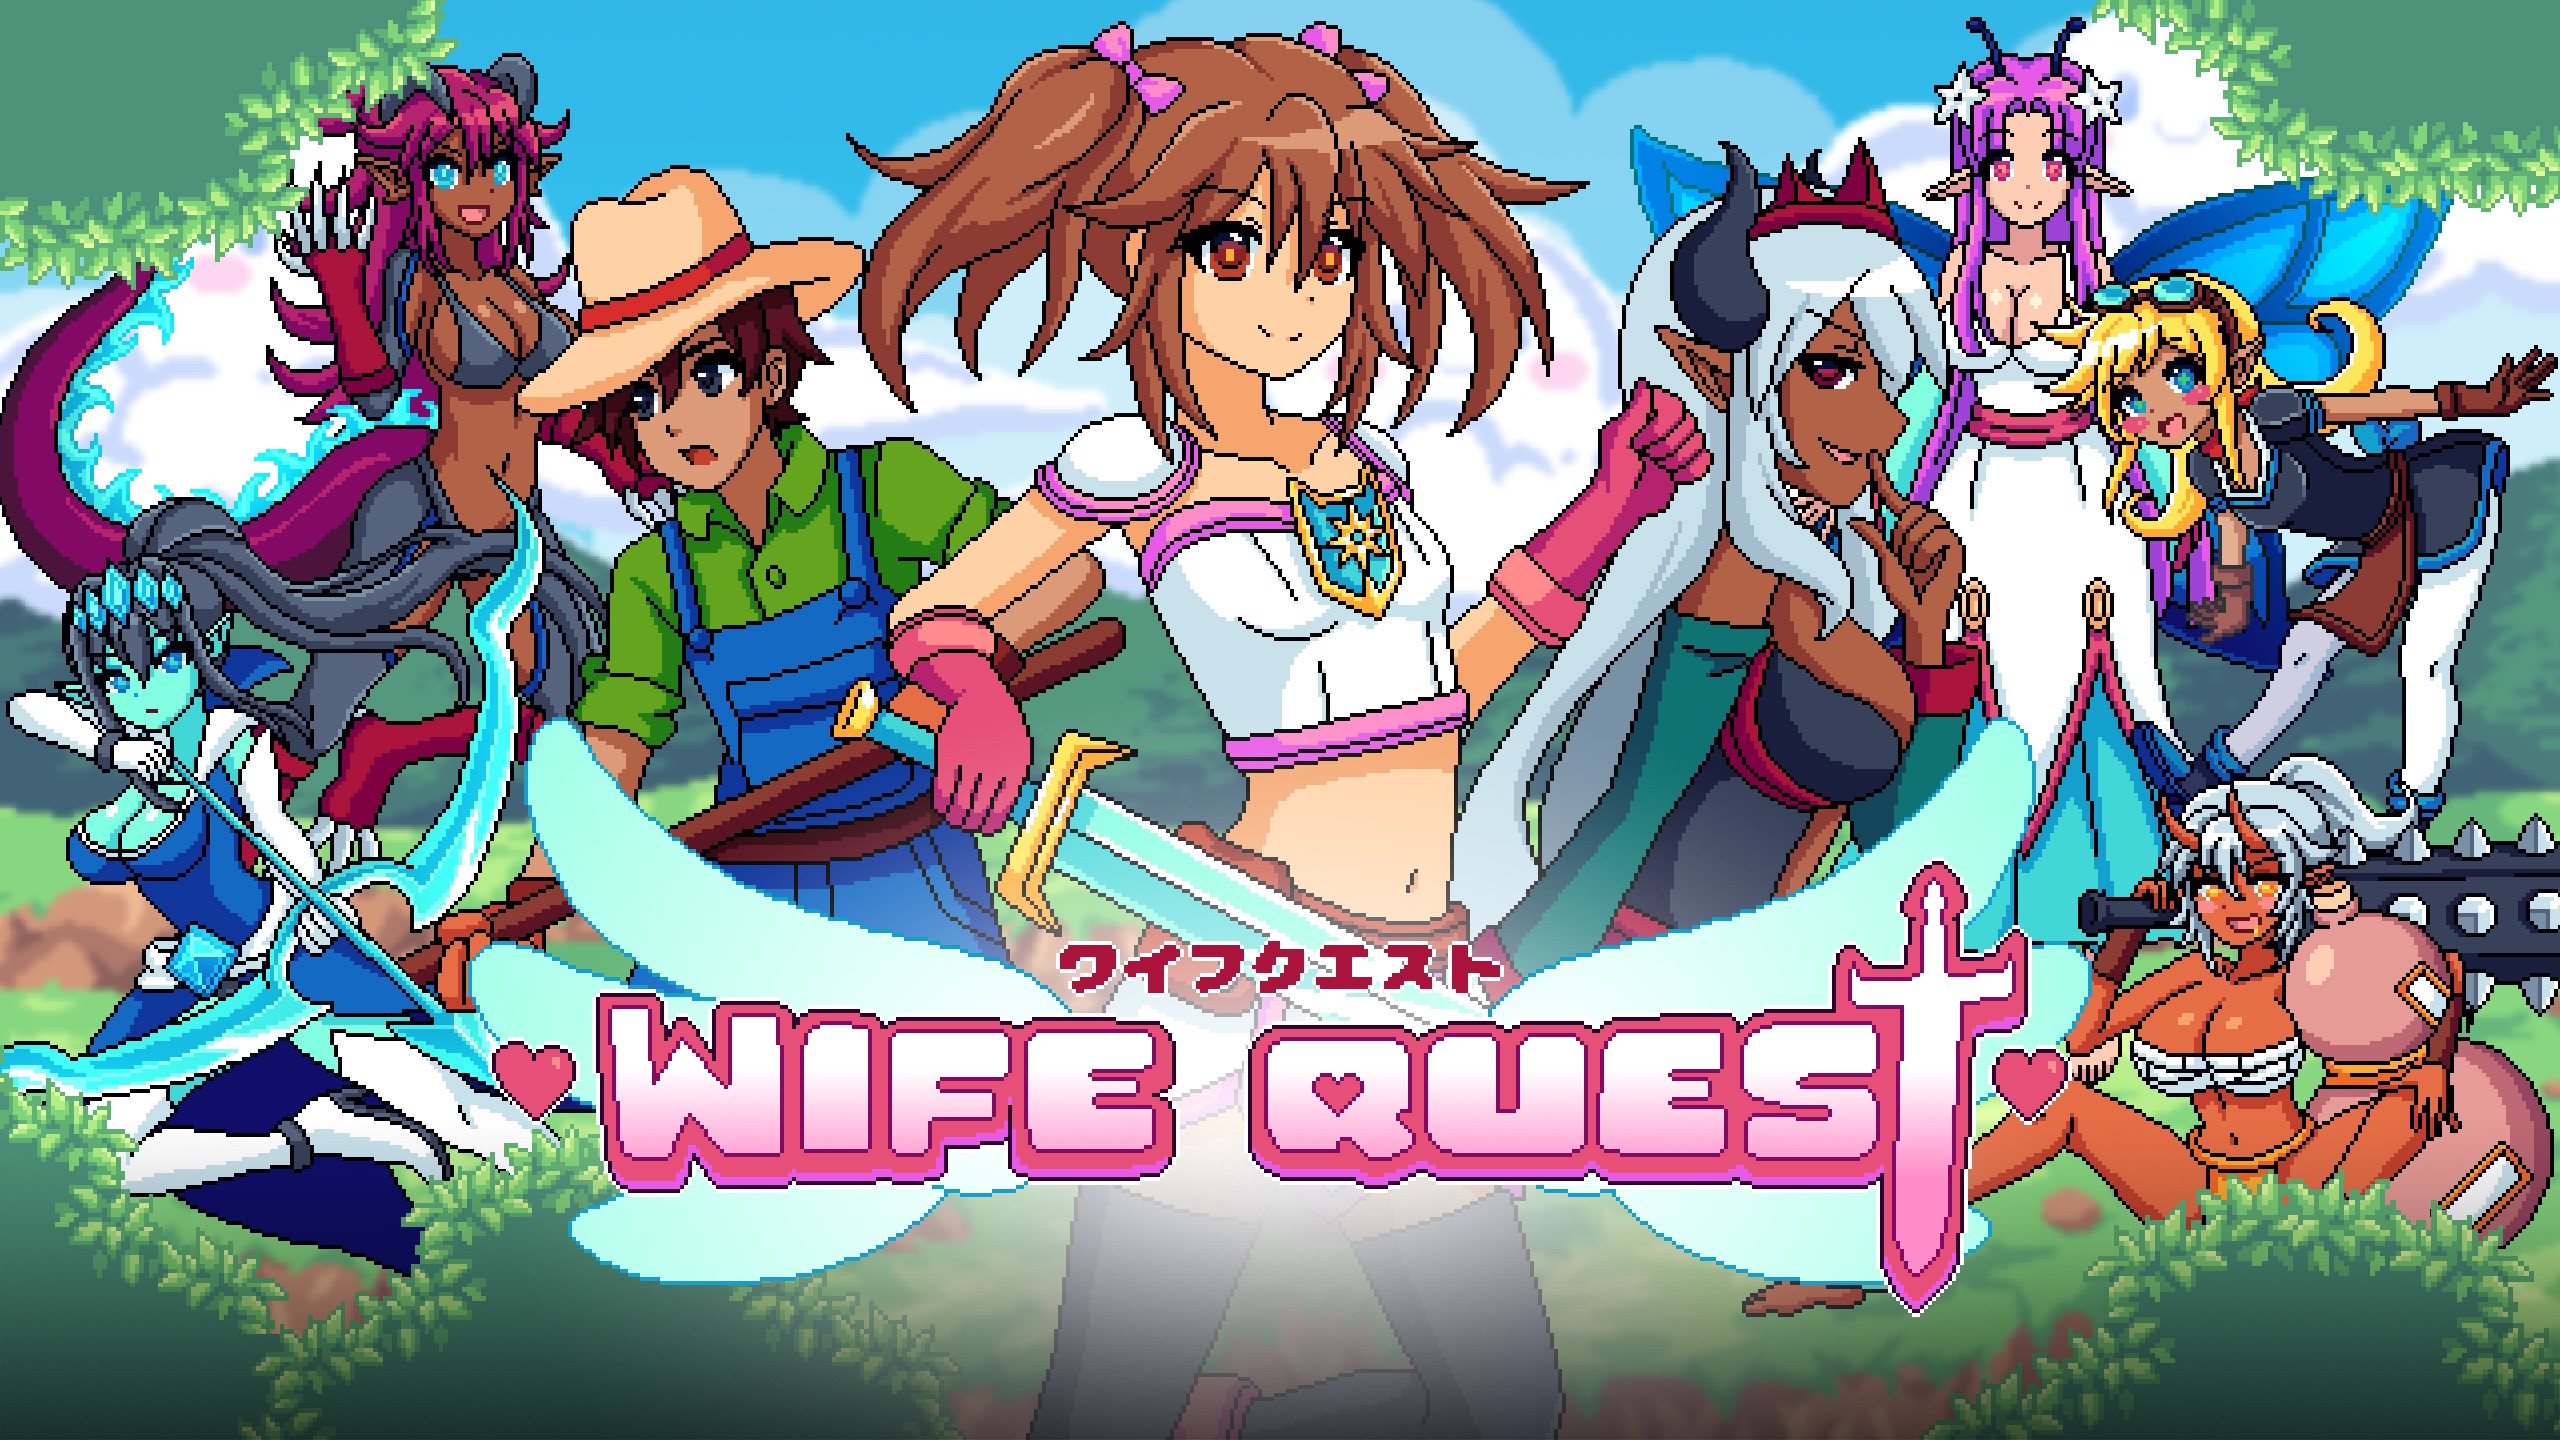 Wife quest